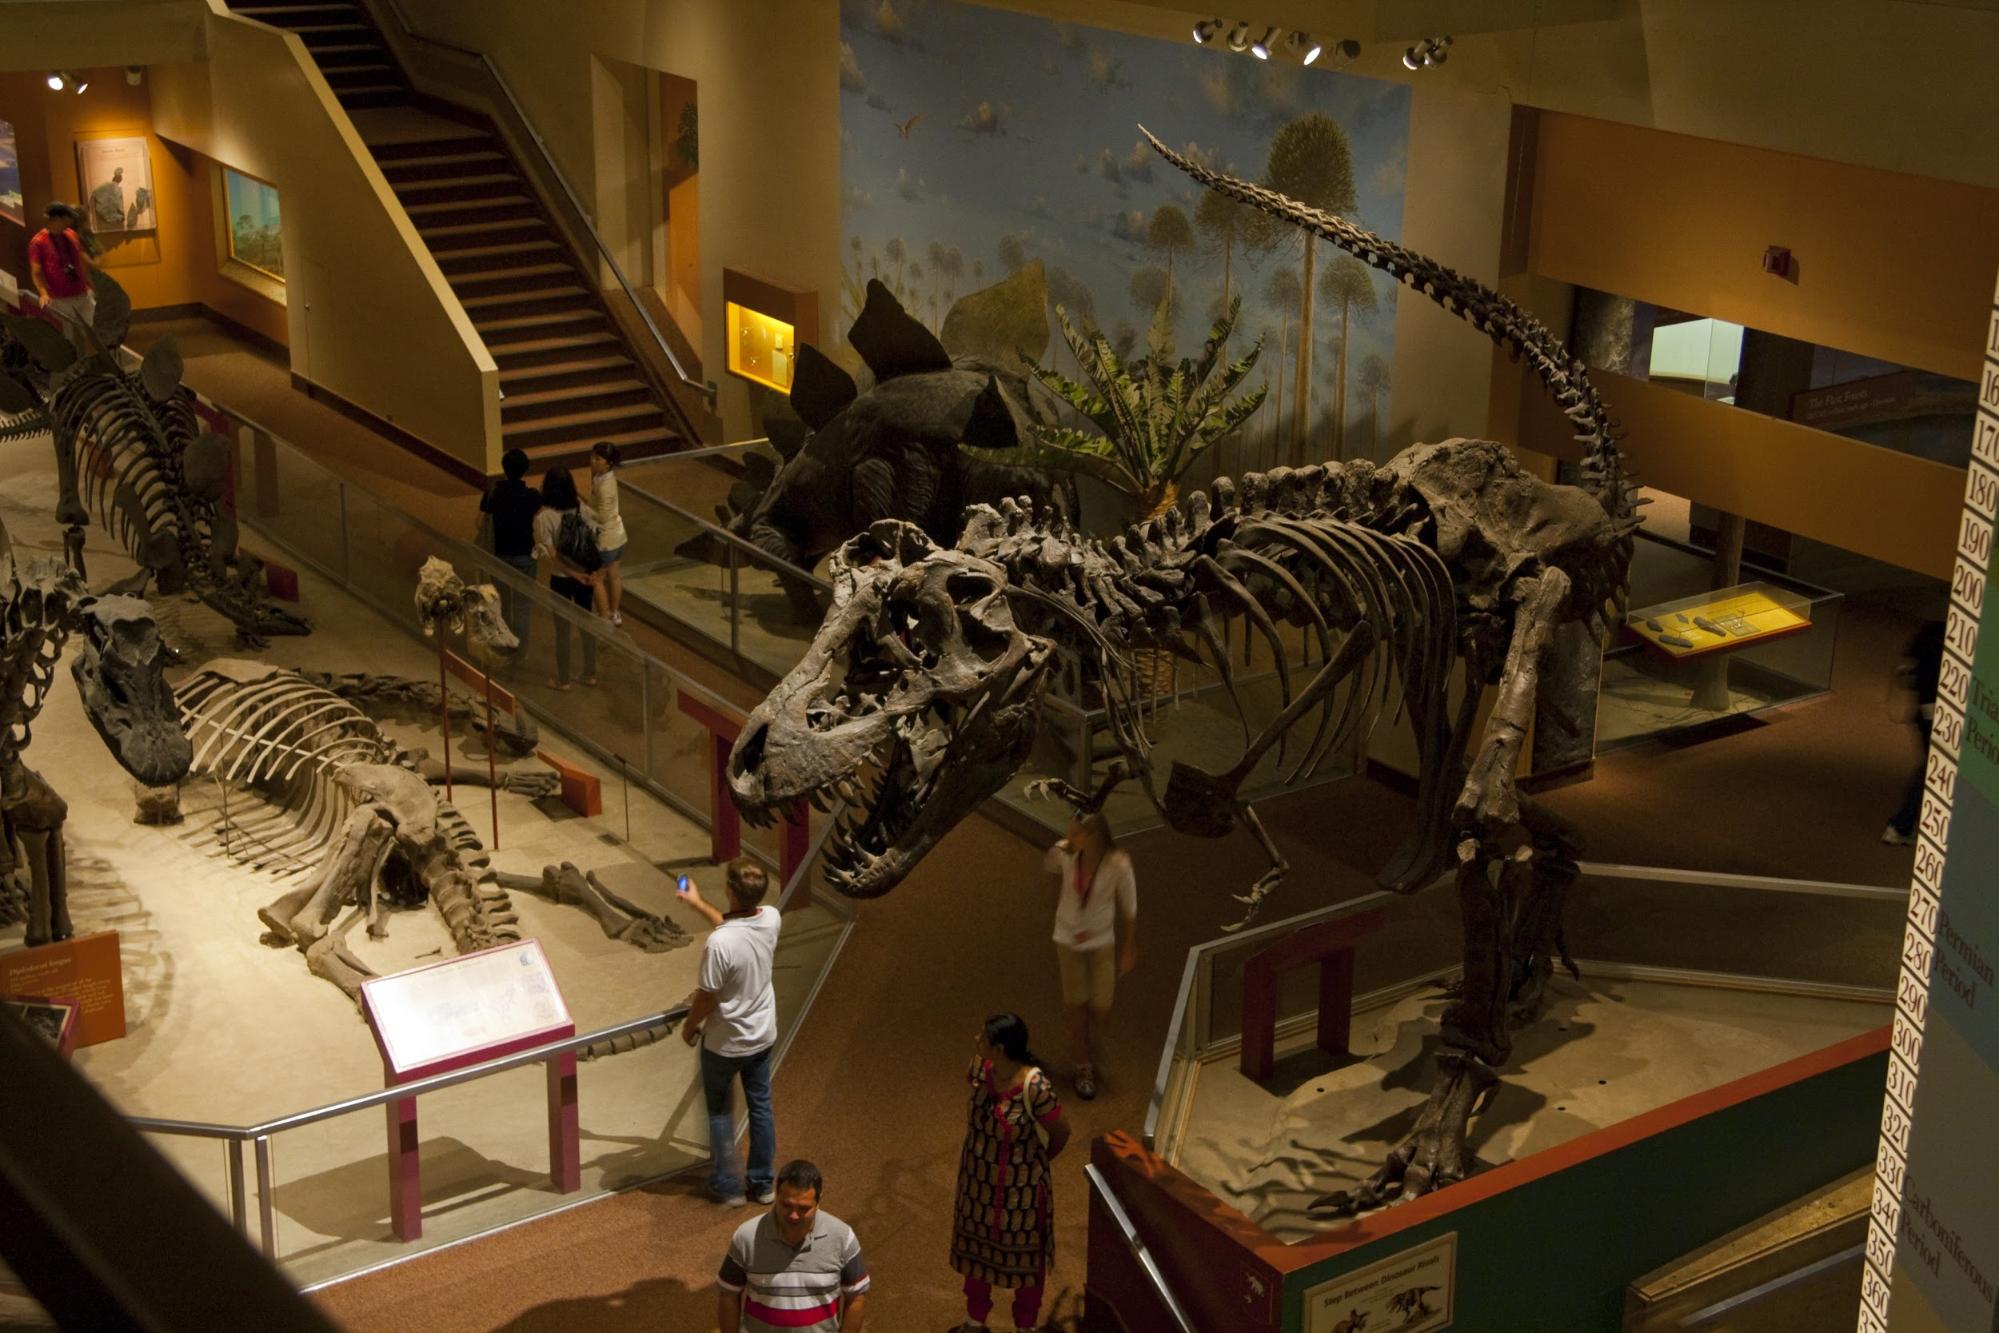 Photo: Smithsonian National Museum of Natural History Hall of Fossils in 2010. Photo by pcouture.